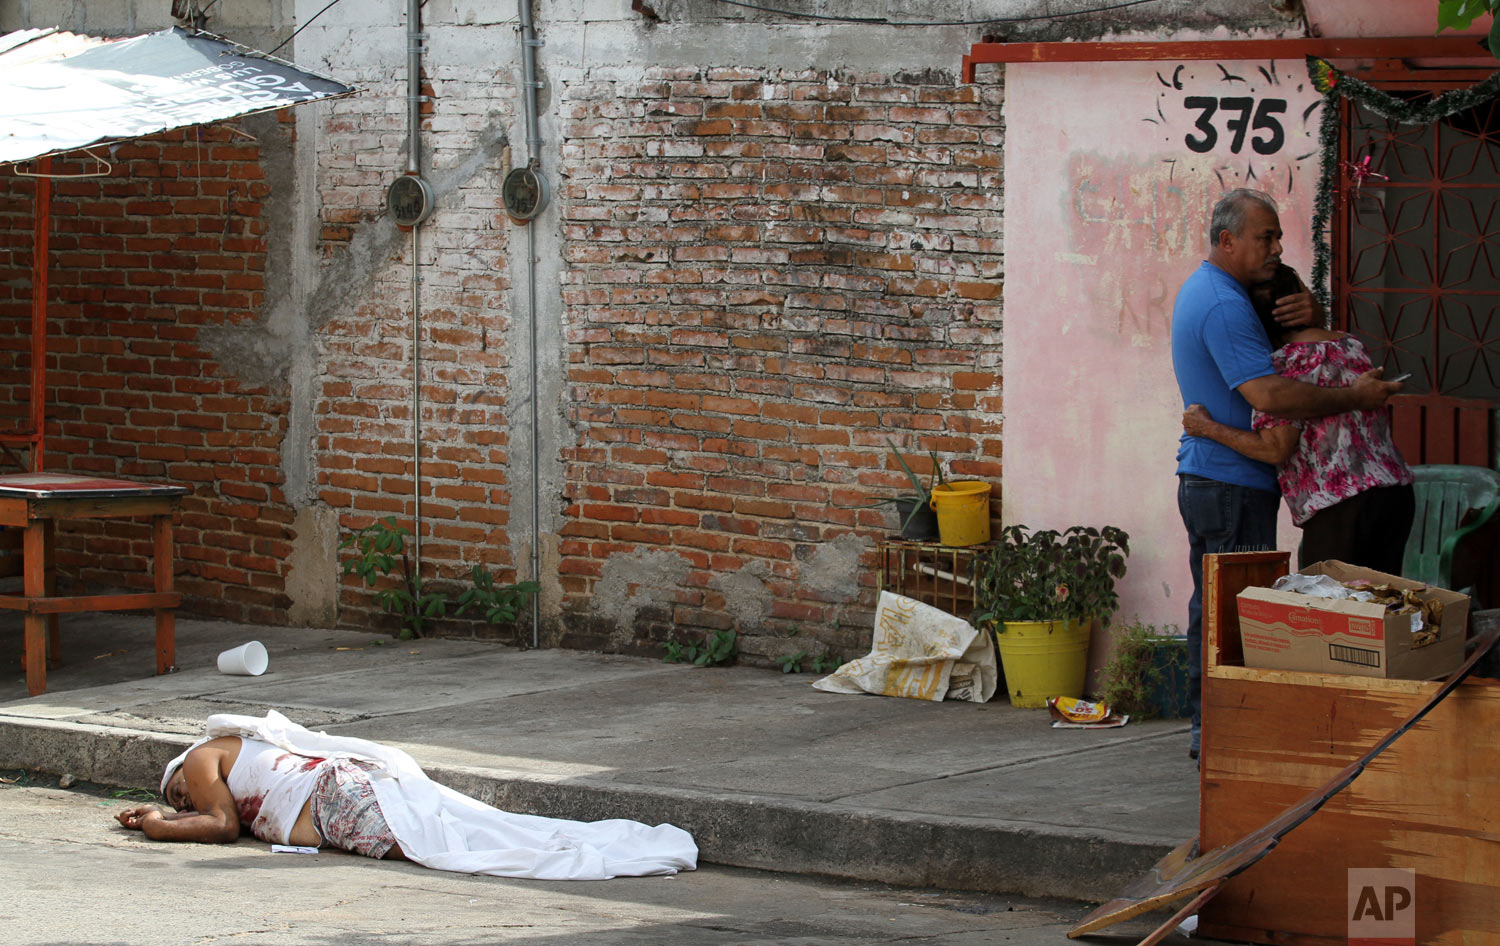  A man's body lies on the pavement after he was shot to death, as his parents hug nearby in Acapulco, Mexico, Jan. 2, 2019. (AP Photo/Bernardindo Hernandez) 